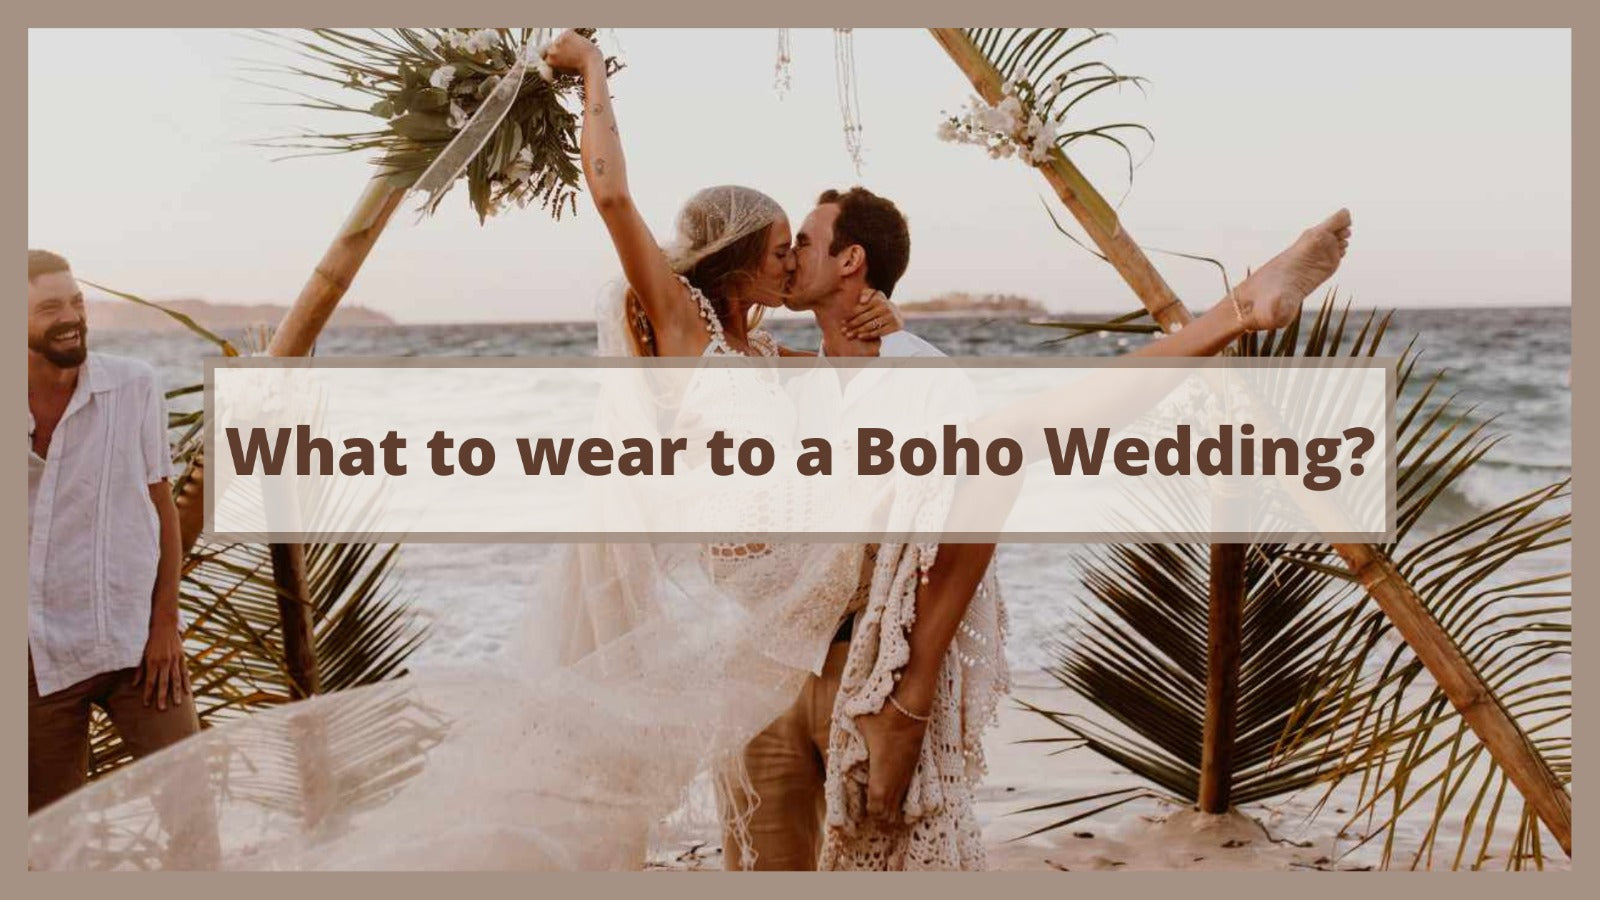 What to wear to a boho wedding?